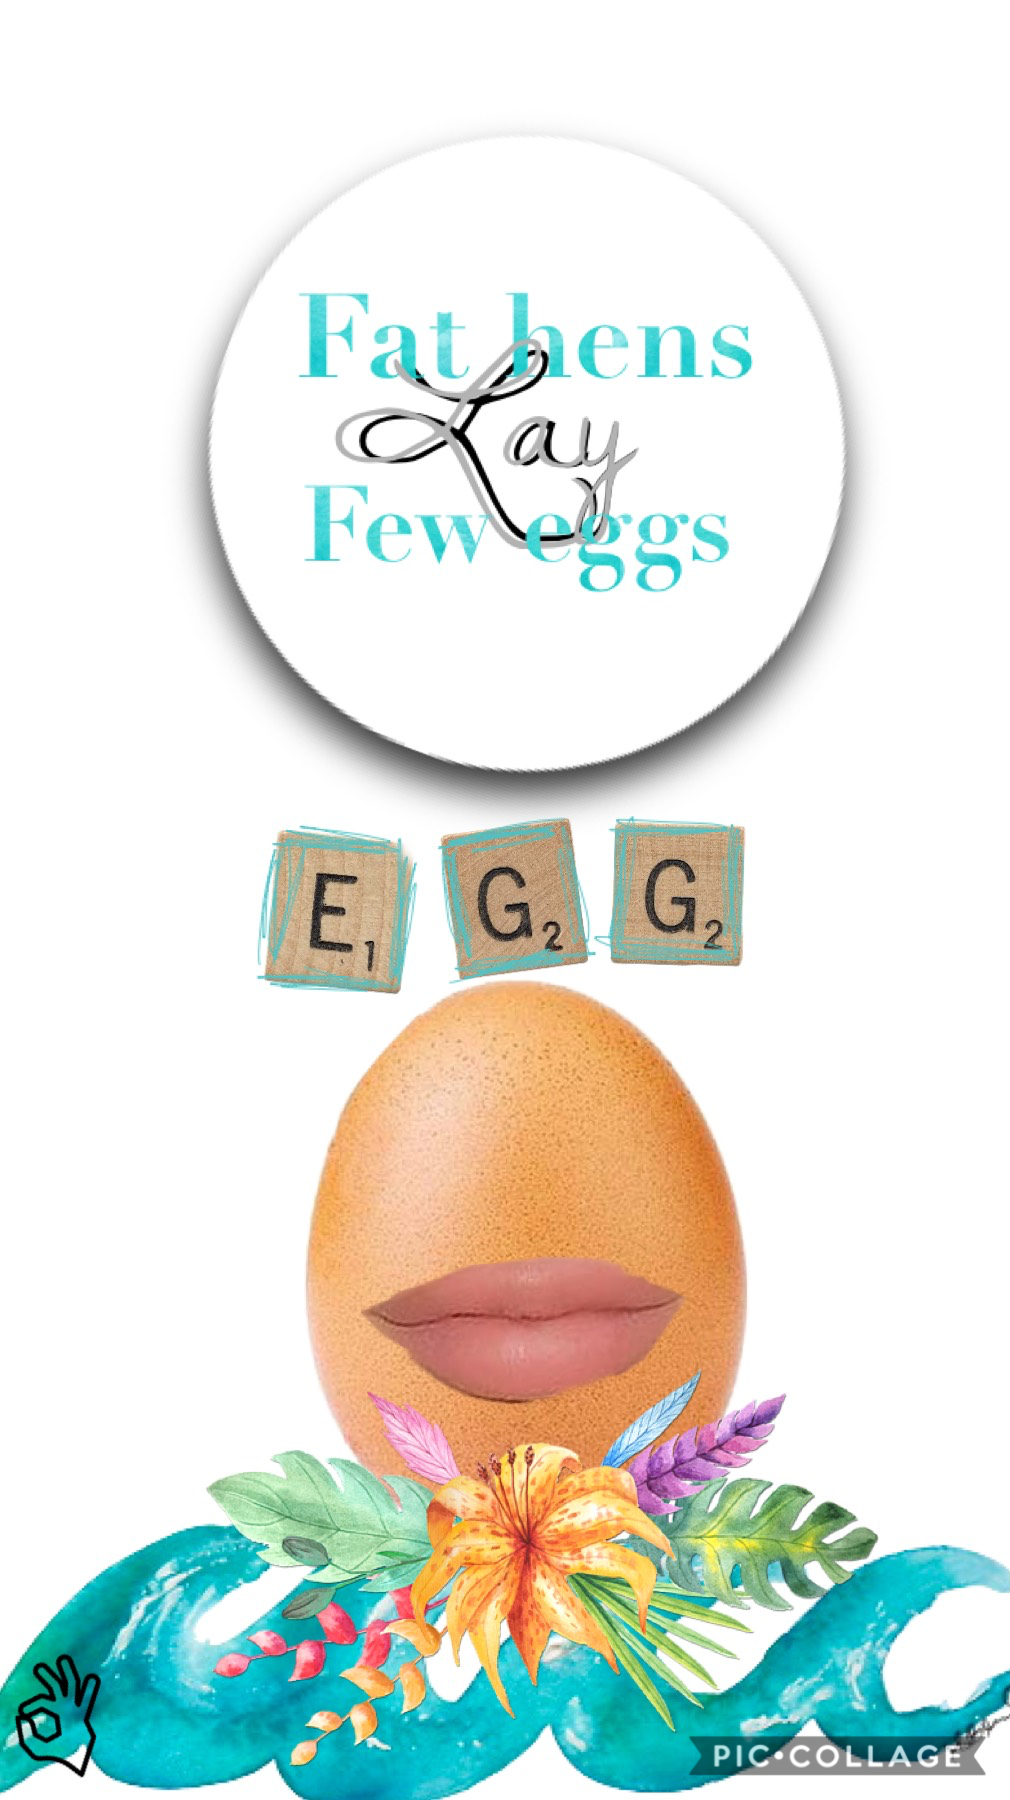 🐣Tap🐣
Kylie Jenner who? Now we all know that the egg came first.